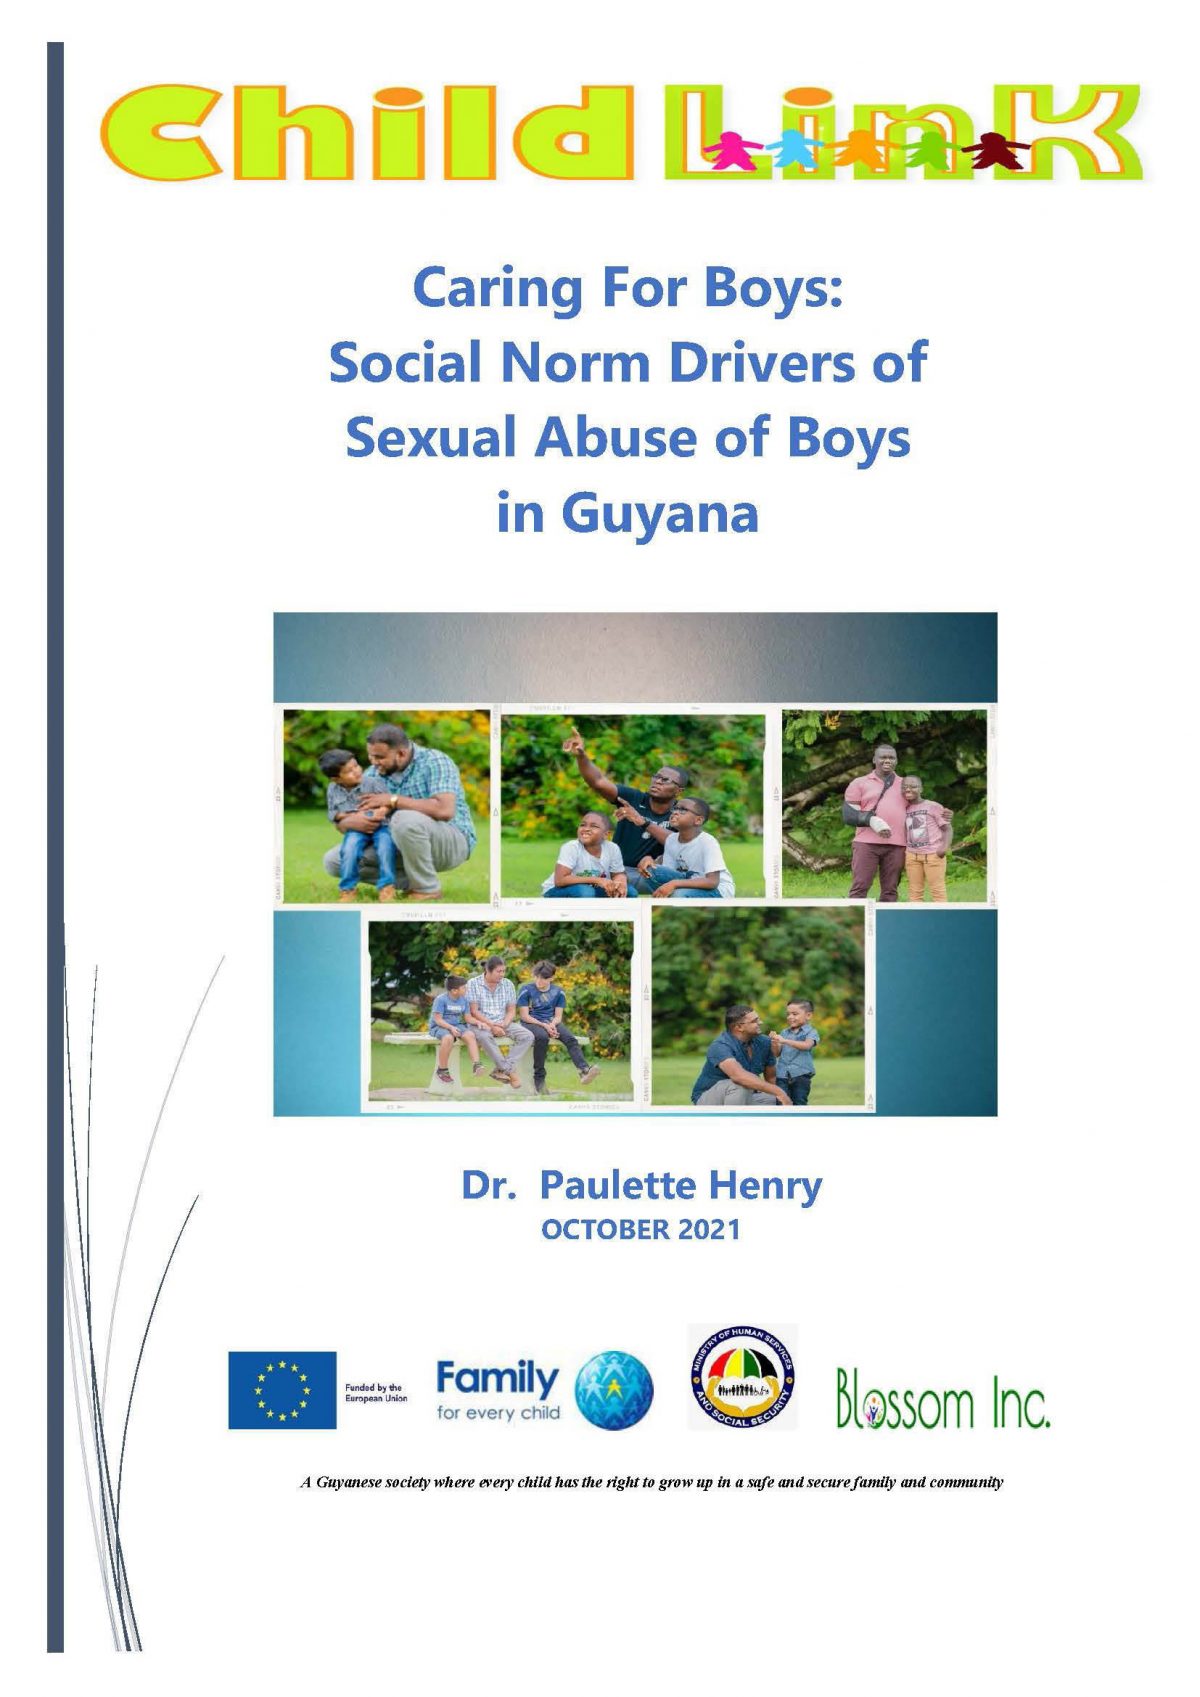 The cover of the ChildLink report
